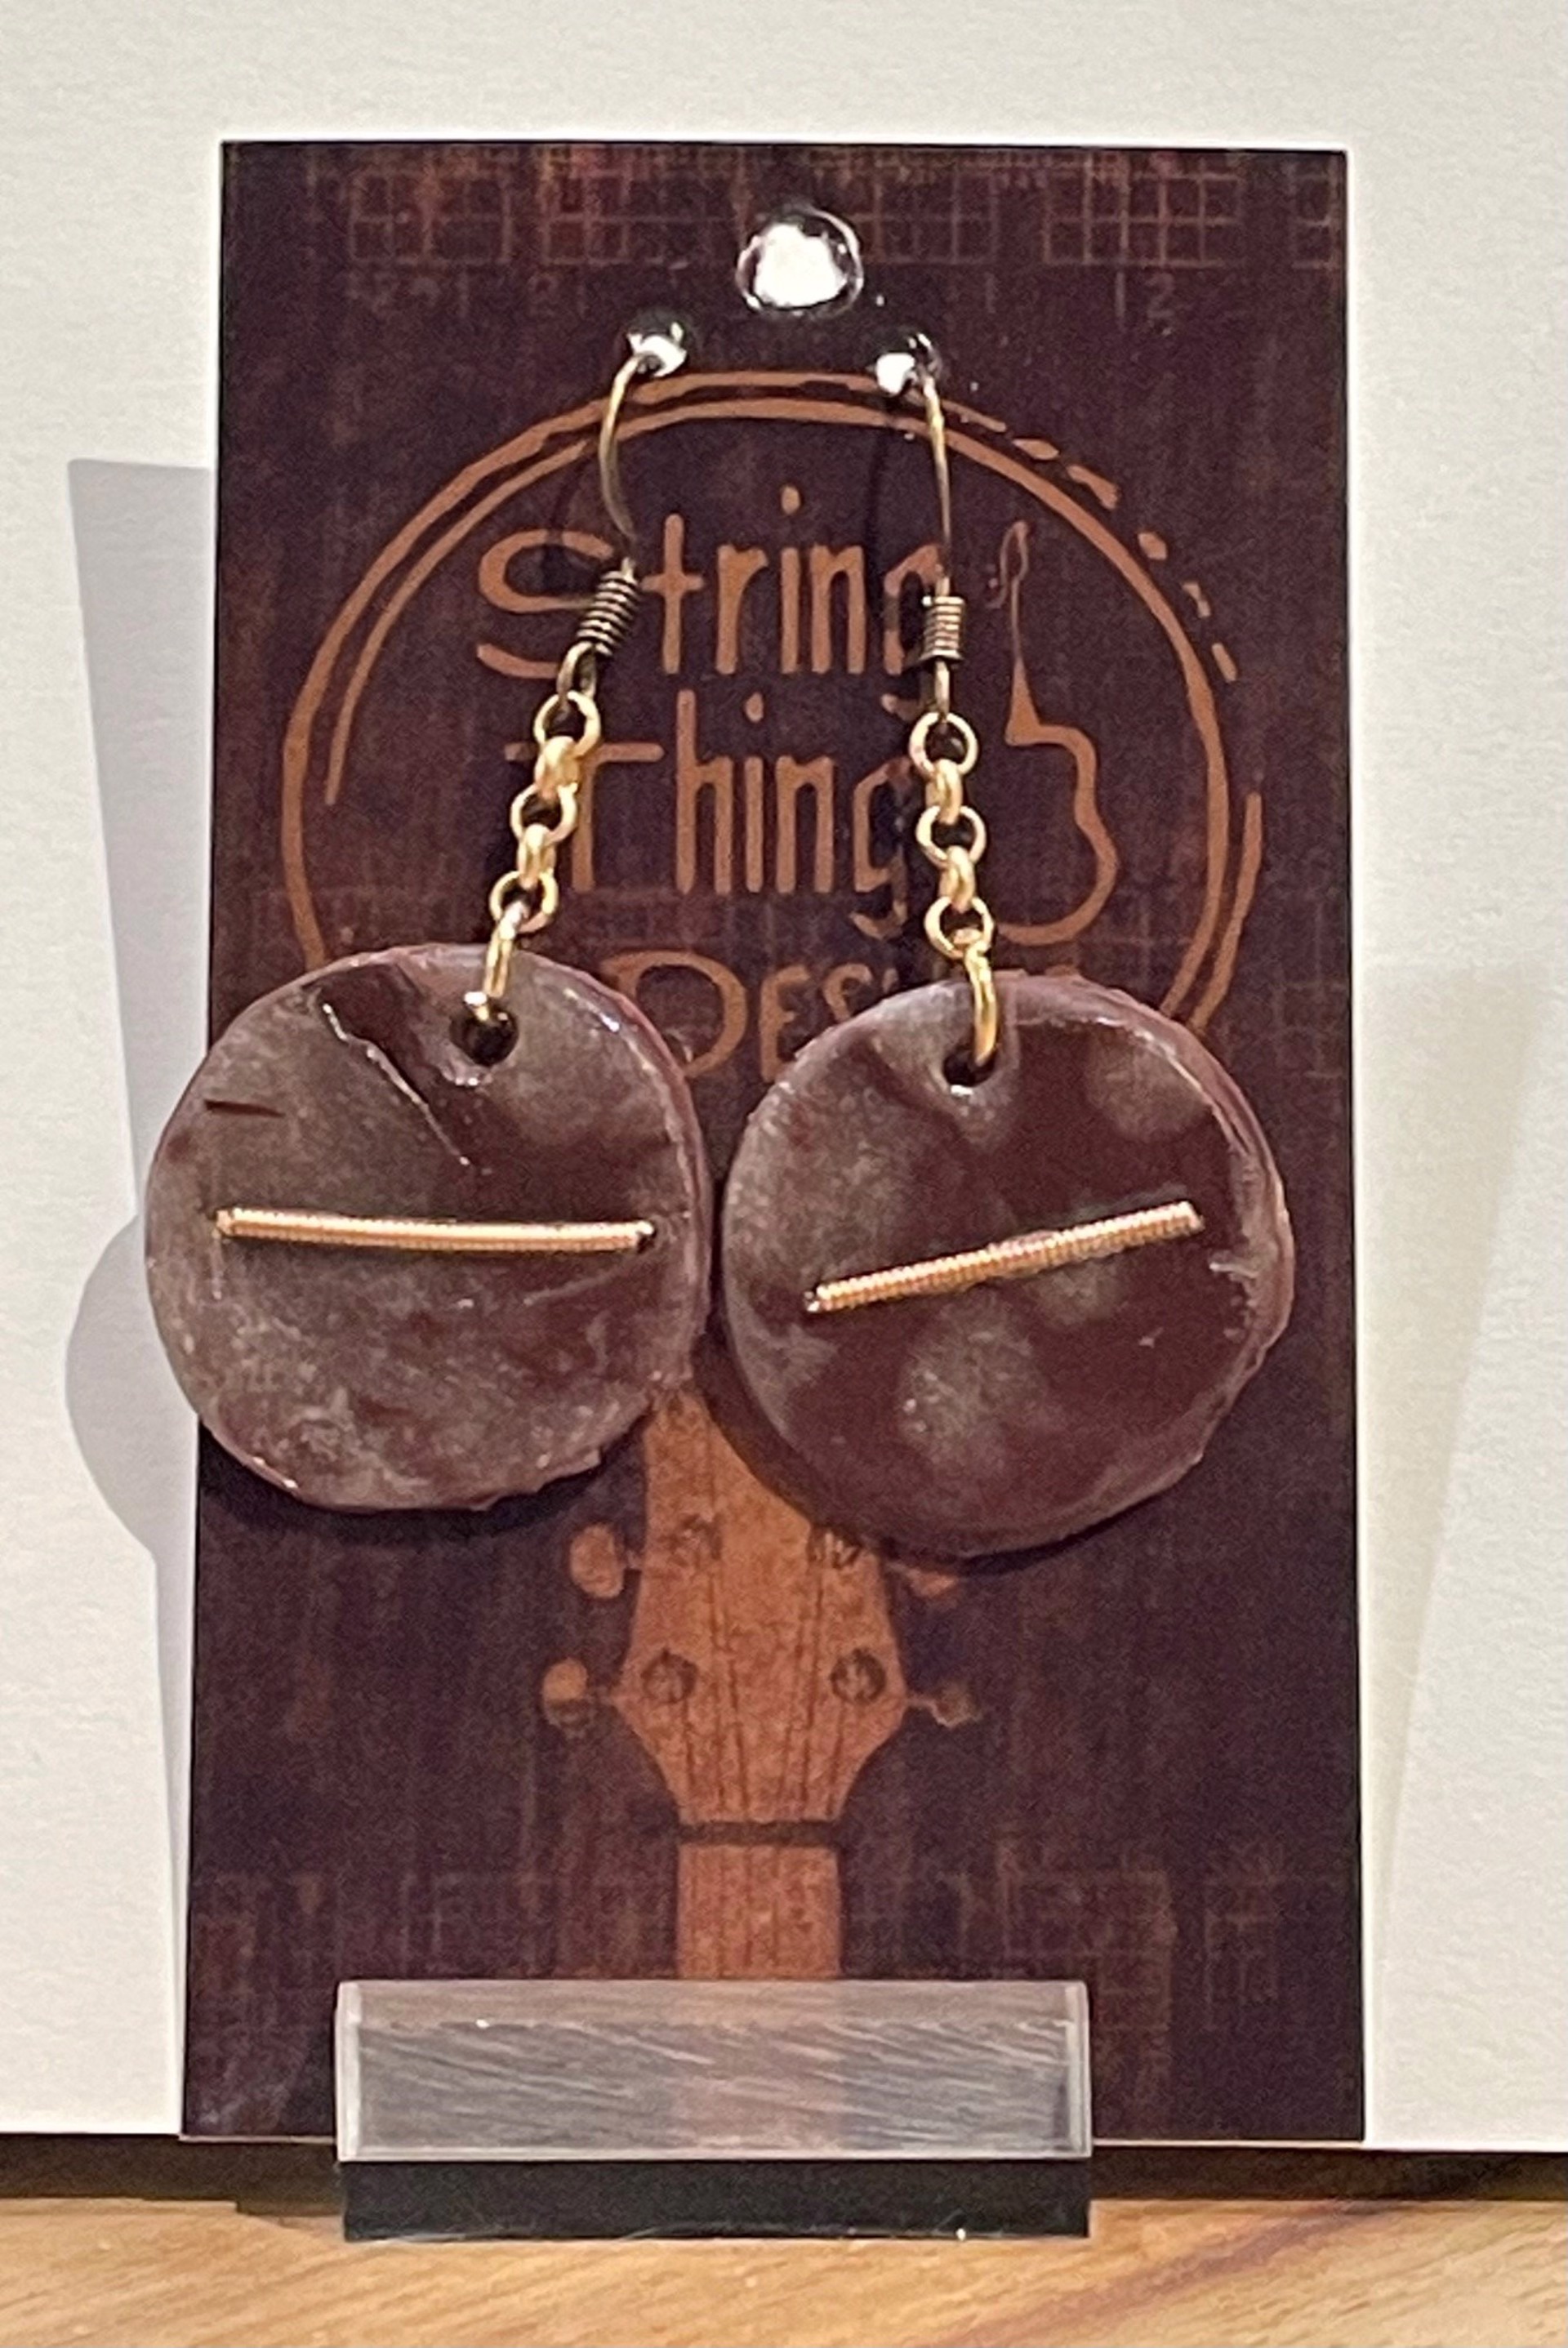 Brown Round Guitar String Earrings by String Thing Designs